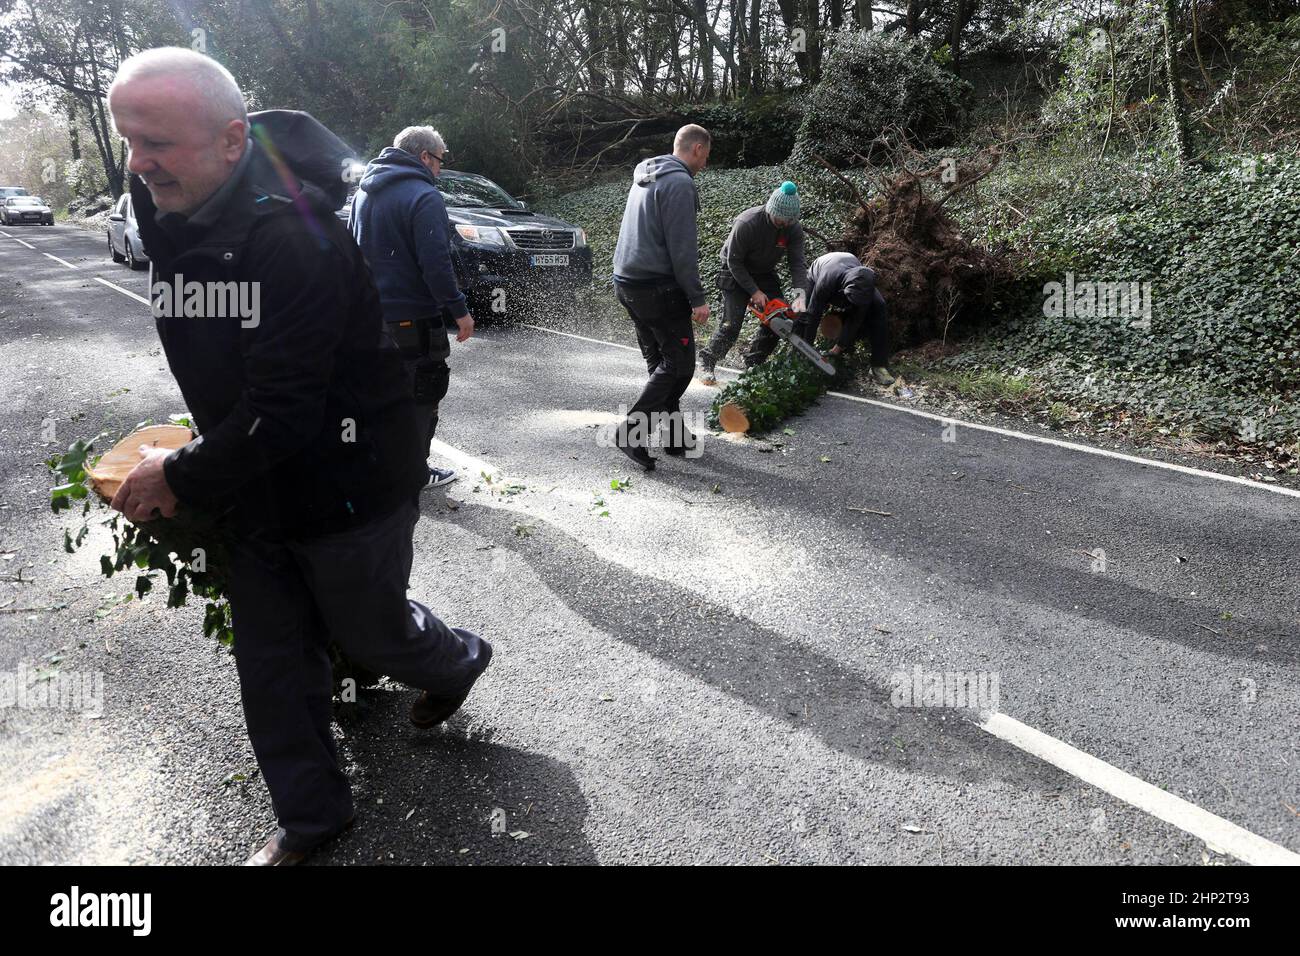 Chichester, West Sussex, UK. Tree down on Kennel Hill, Goodwood due to Storm Eunice. Members of the public in queueing traffic pictured taking action and removing it to open up the road thanks to Steve Christopher from NSF Solutions Ltd. Credit: Sam Stephenson/Alamy Live News Stock Photo